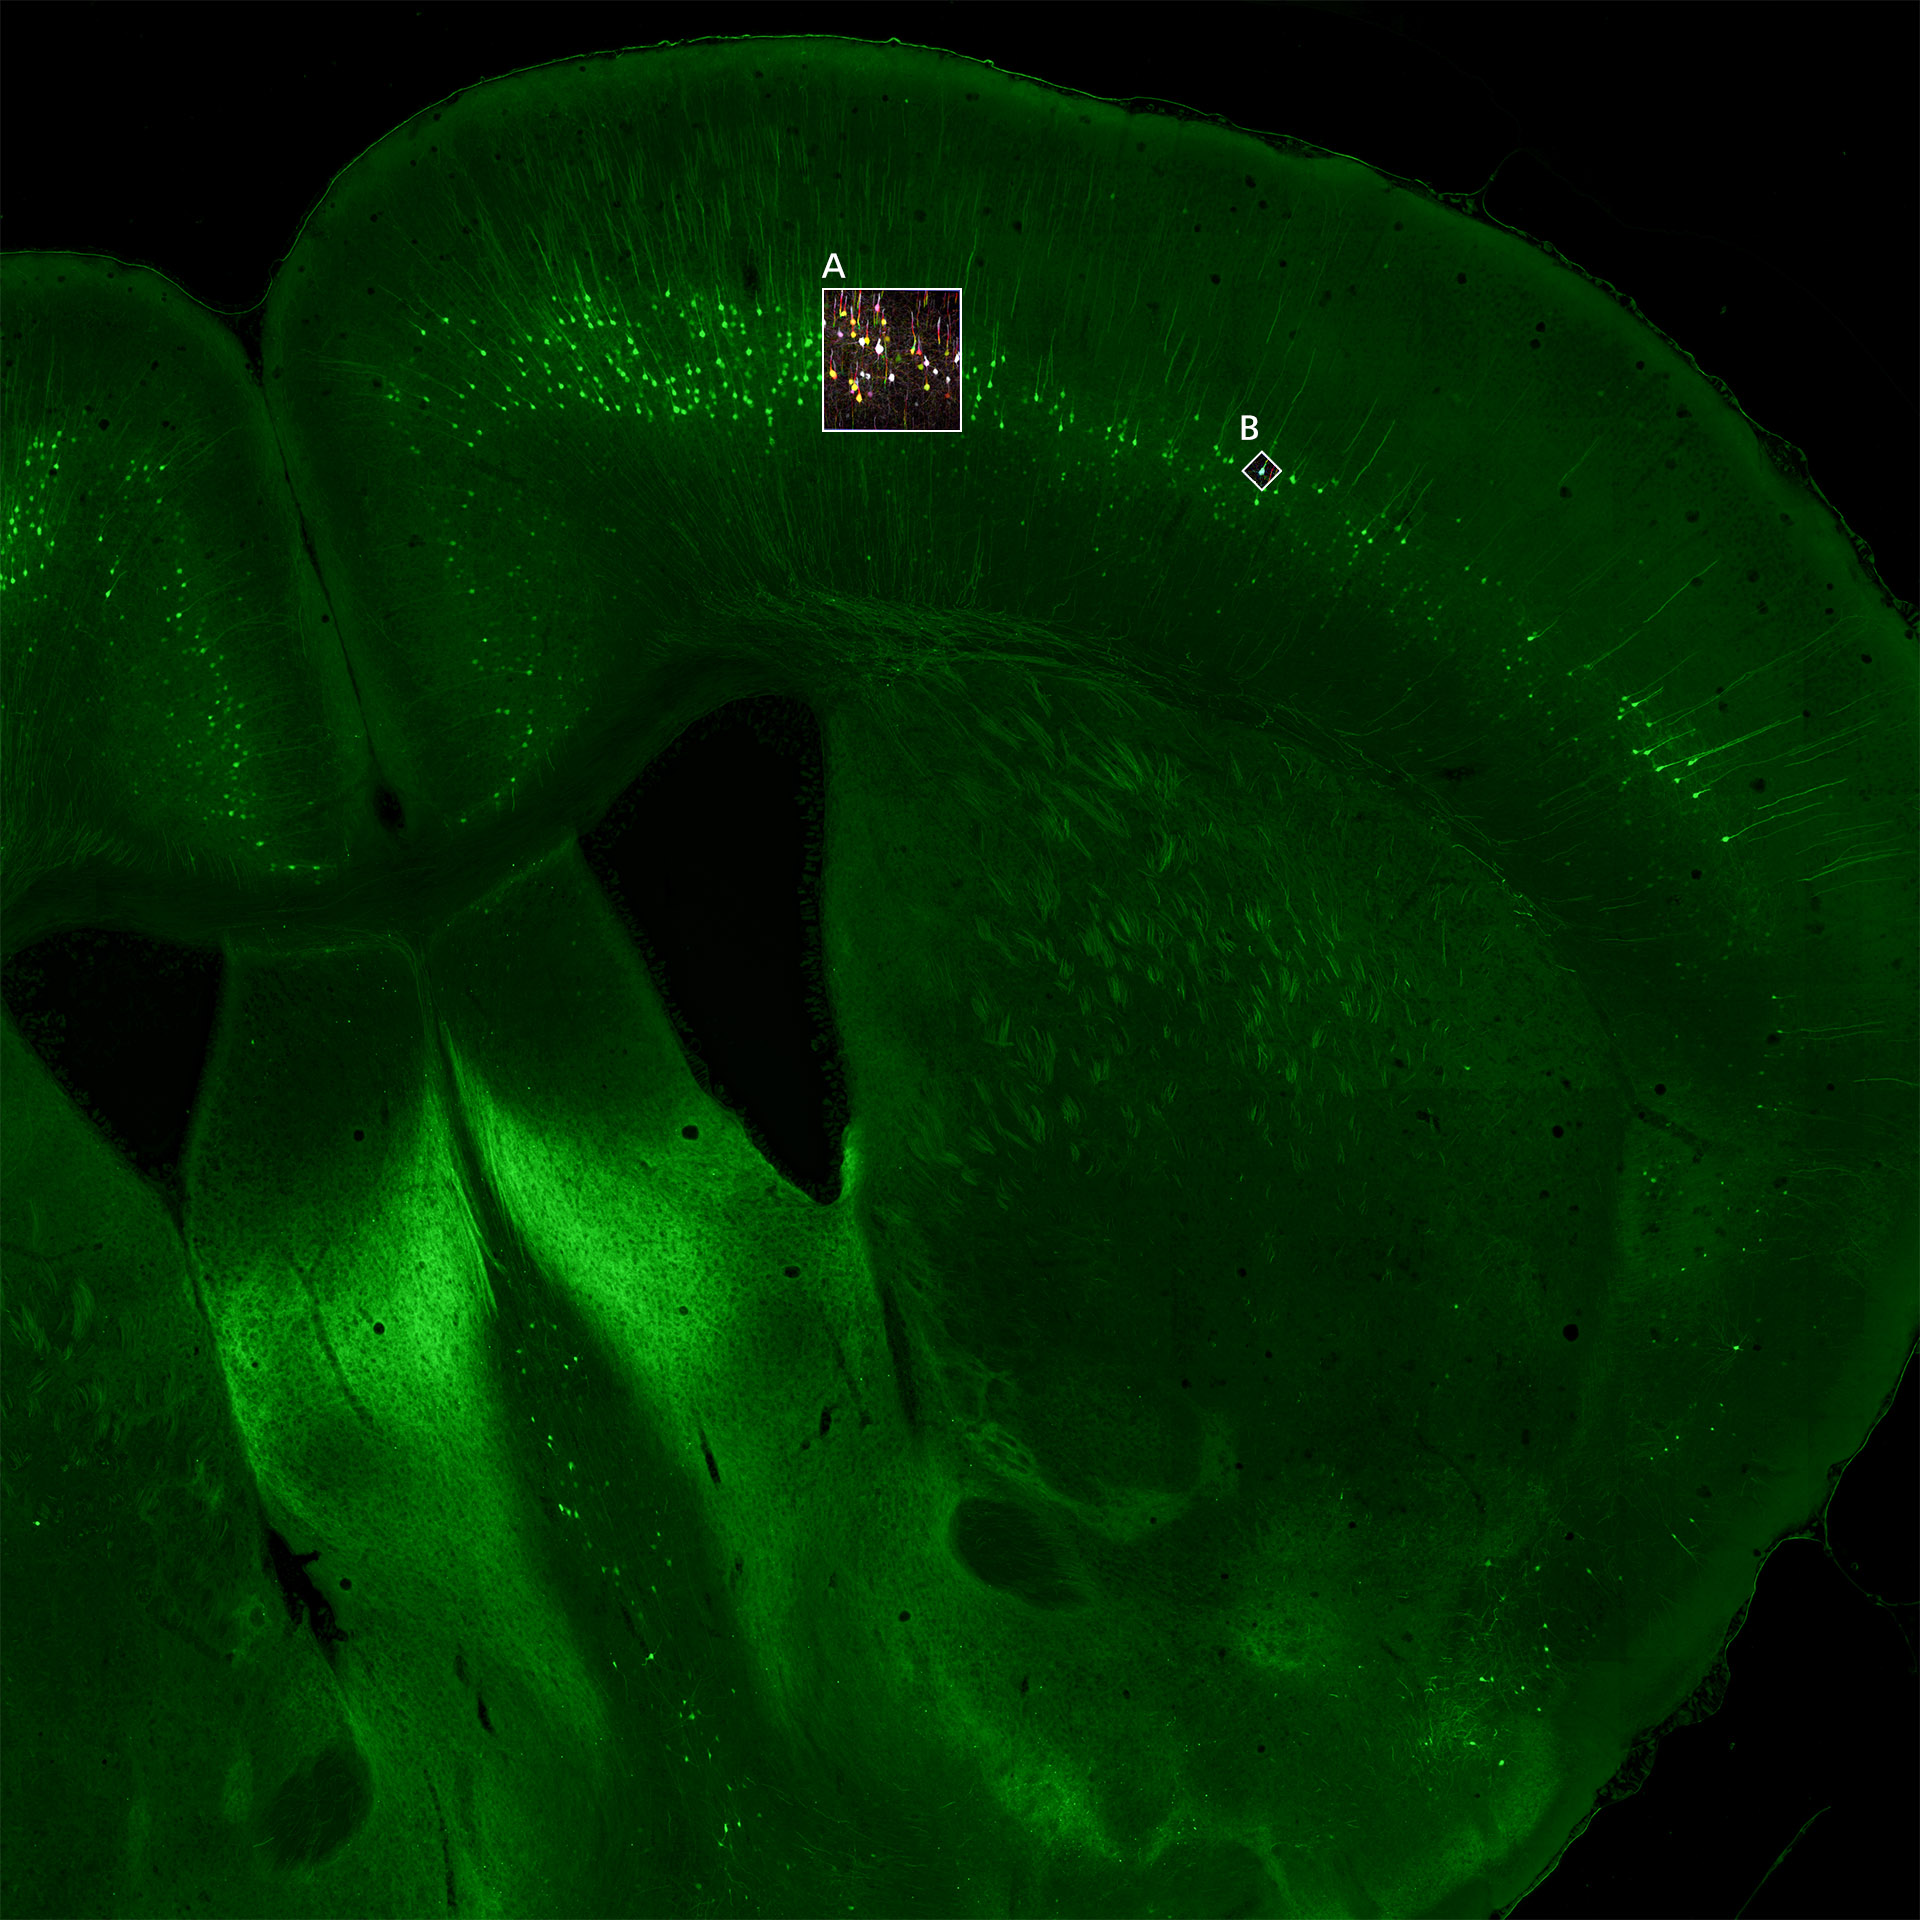 Overview image of mouse brain section collected using digital slide scanner.